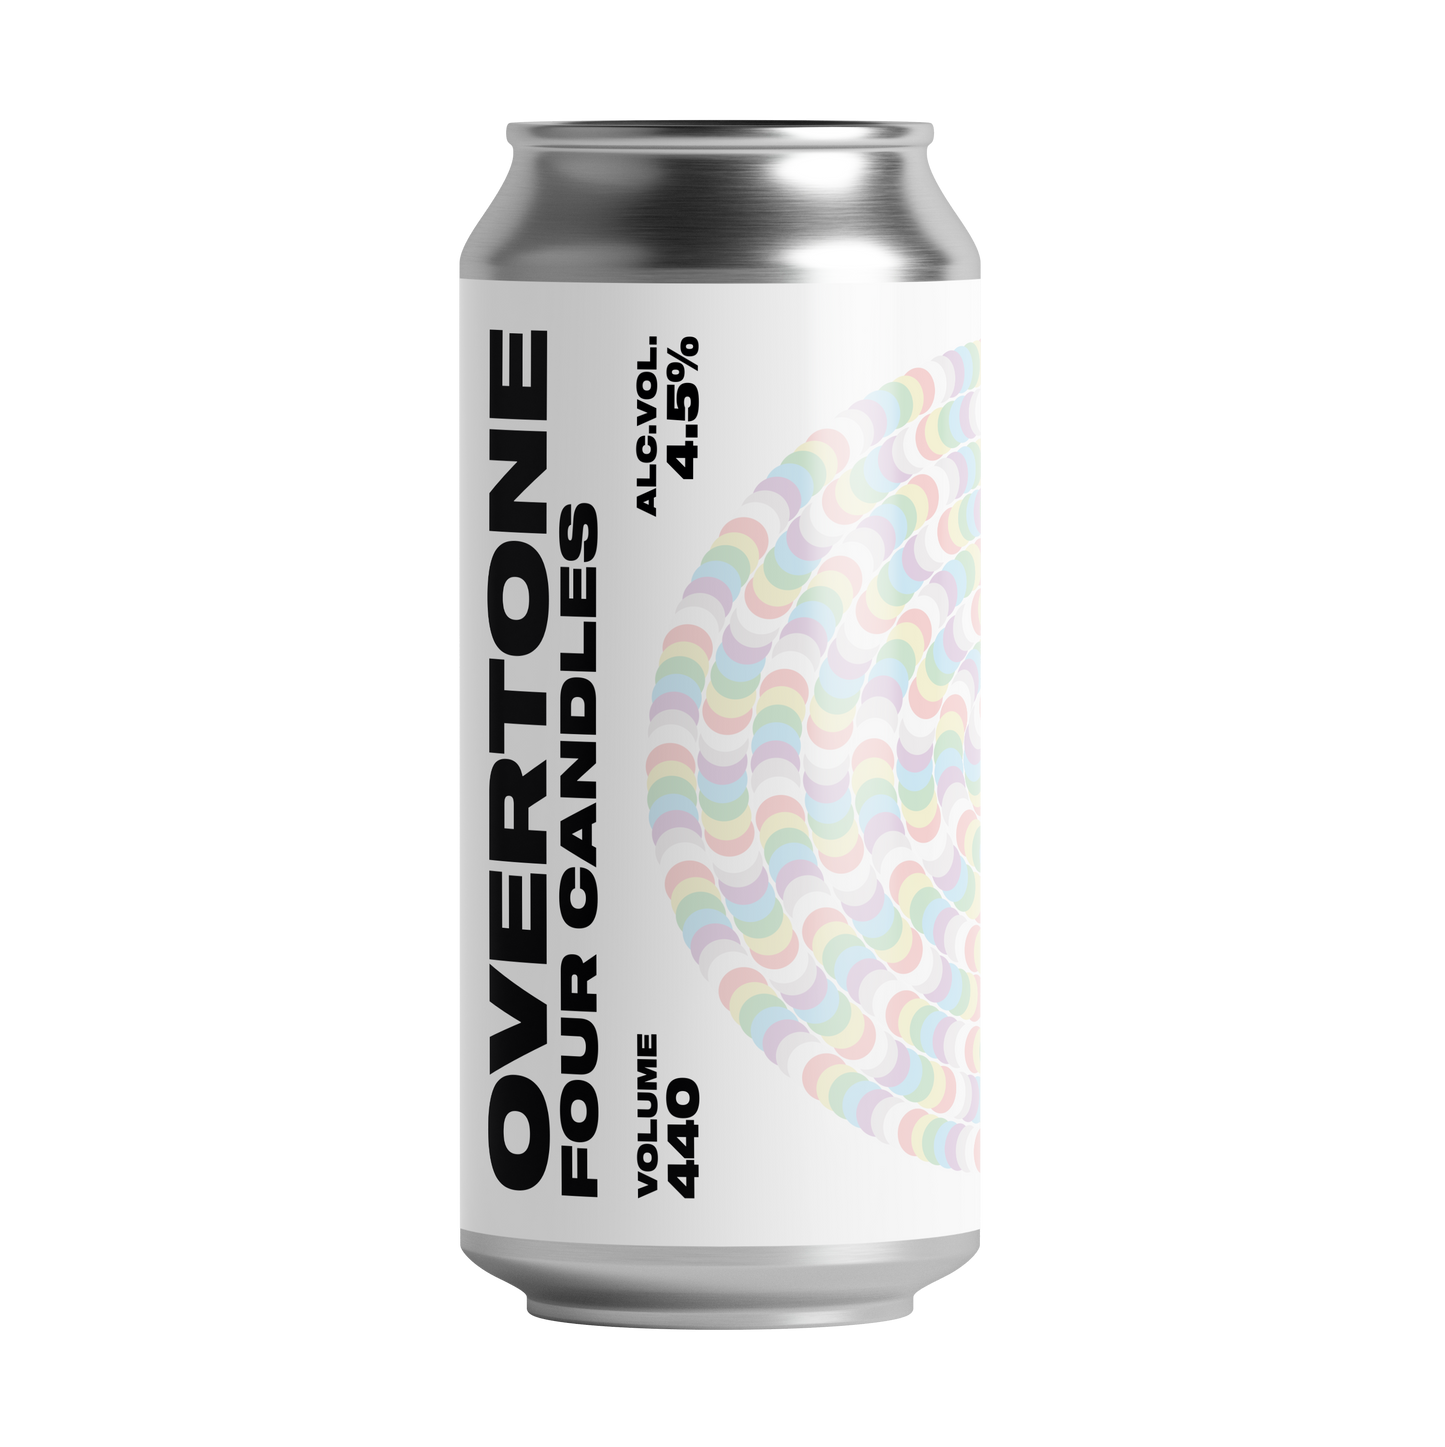 Overtone Four Candles Birthday Pale Ale